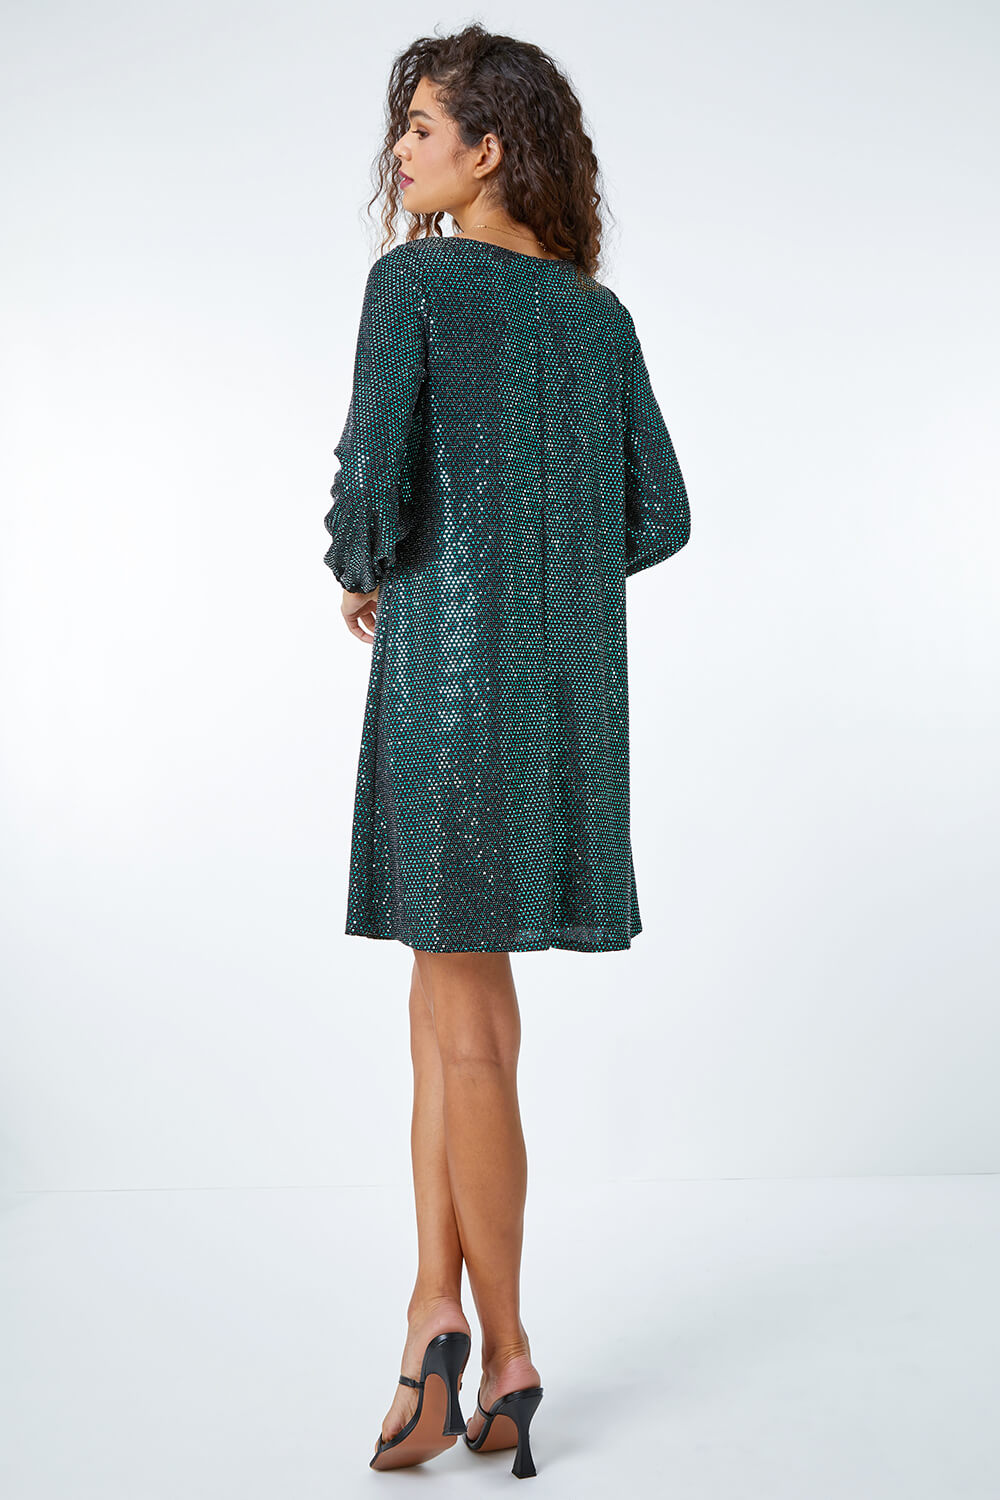 Green Sparkle Detail Swing Dress, Image 3 of 5